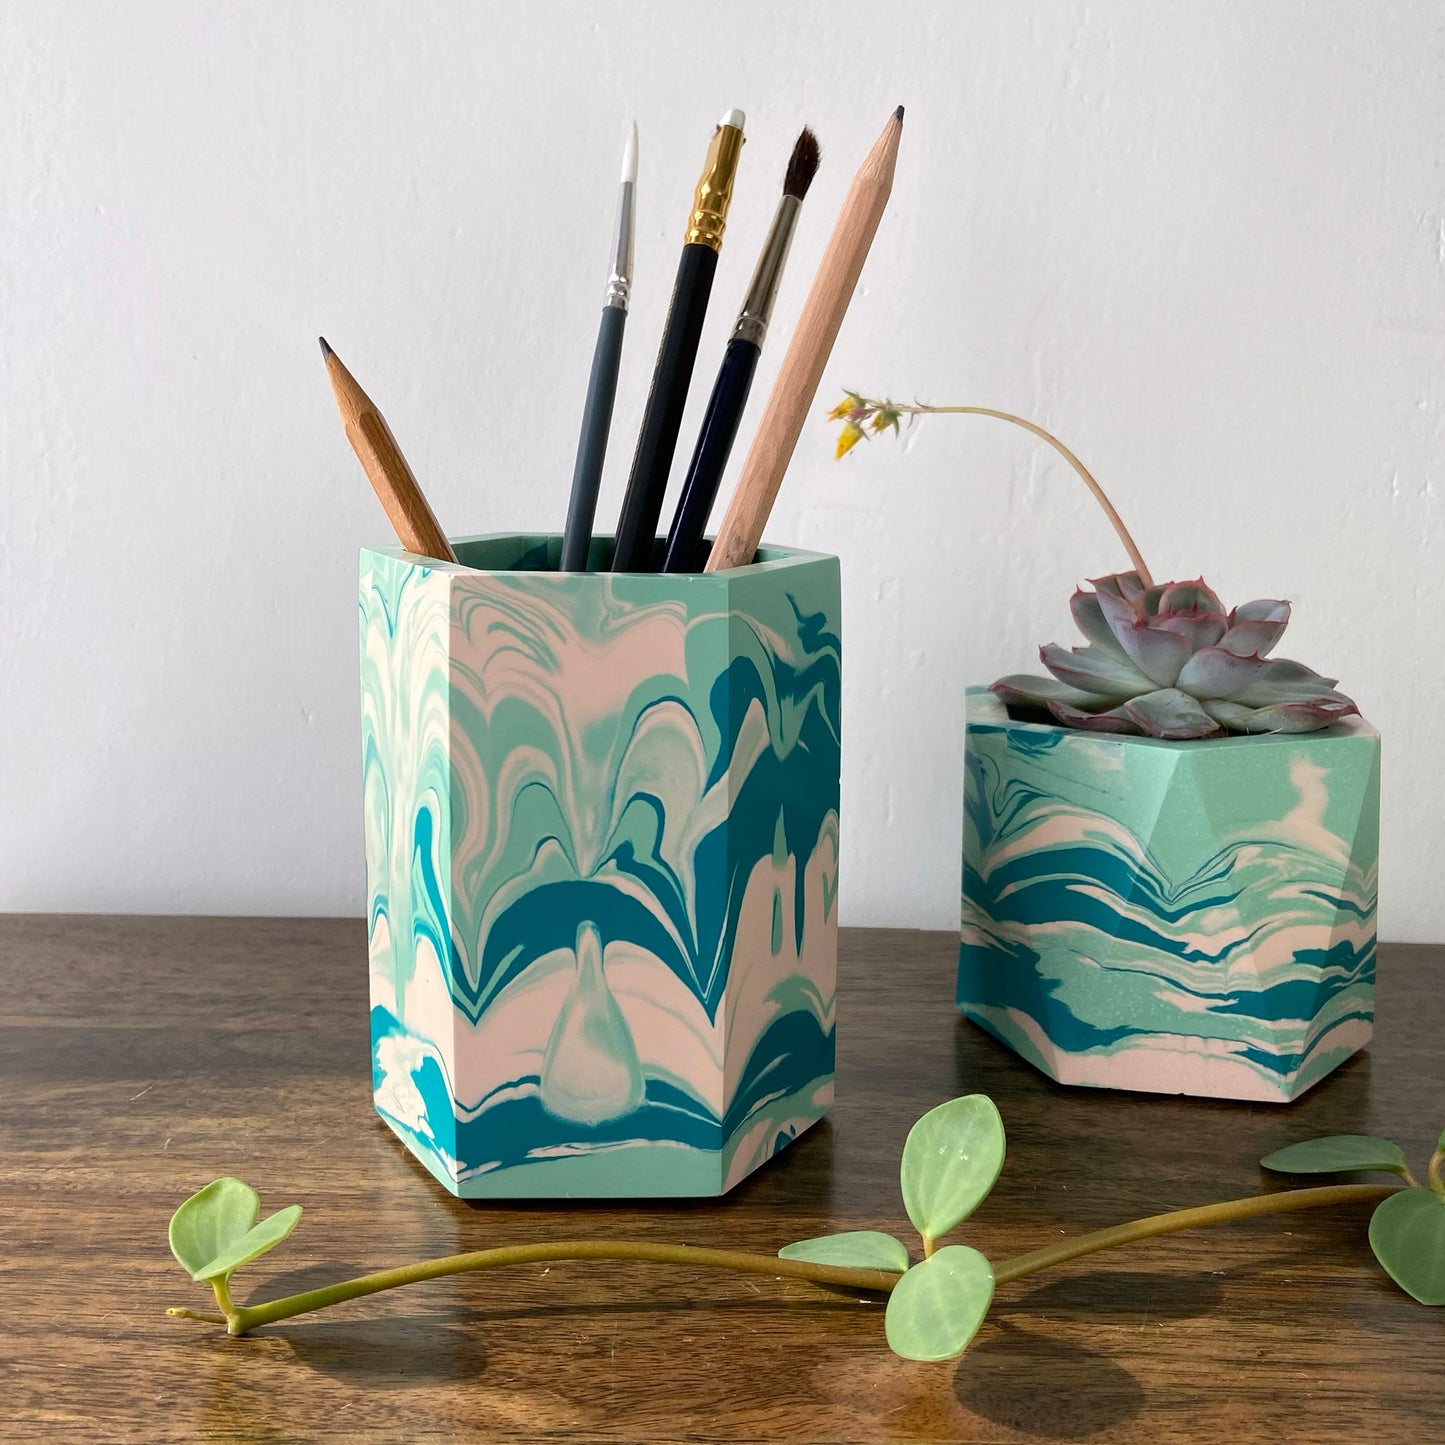 Hexagon pen pot / dried flower vase in marbled teal + pink